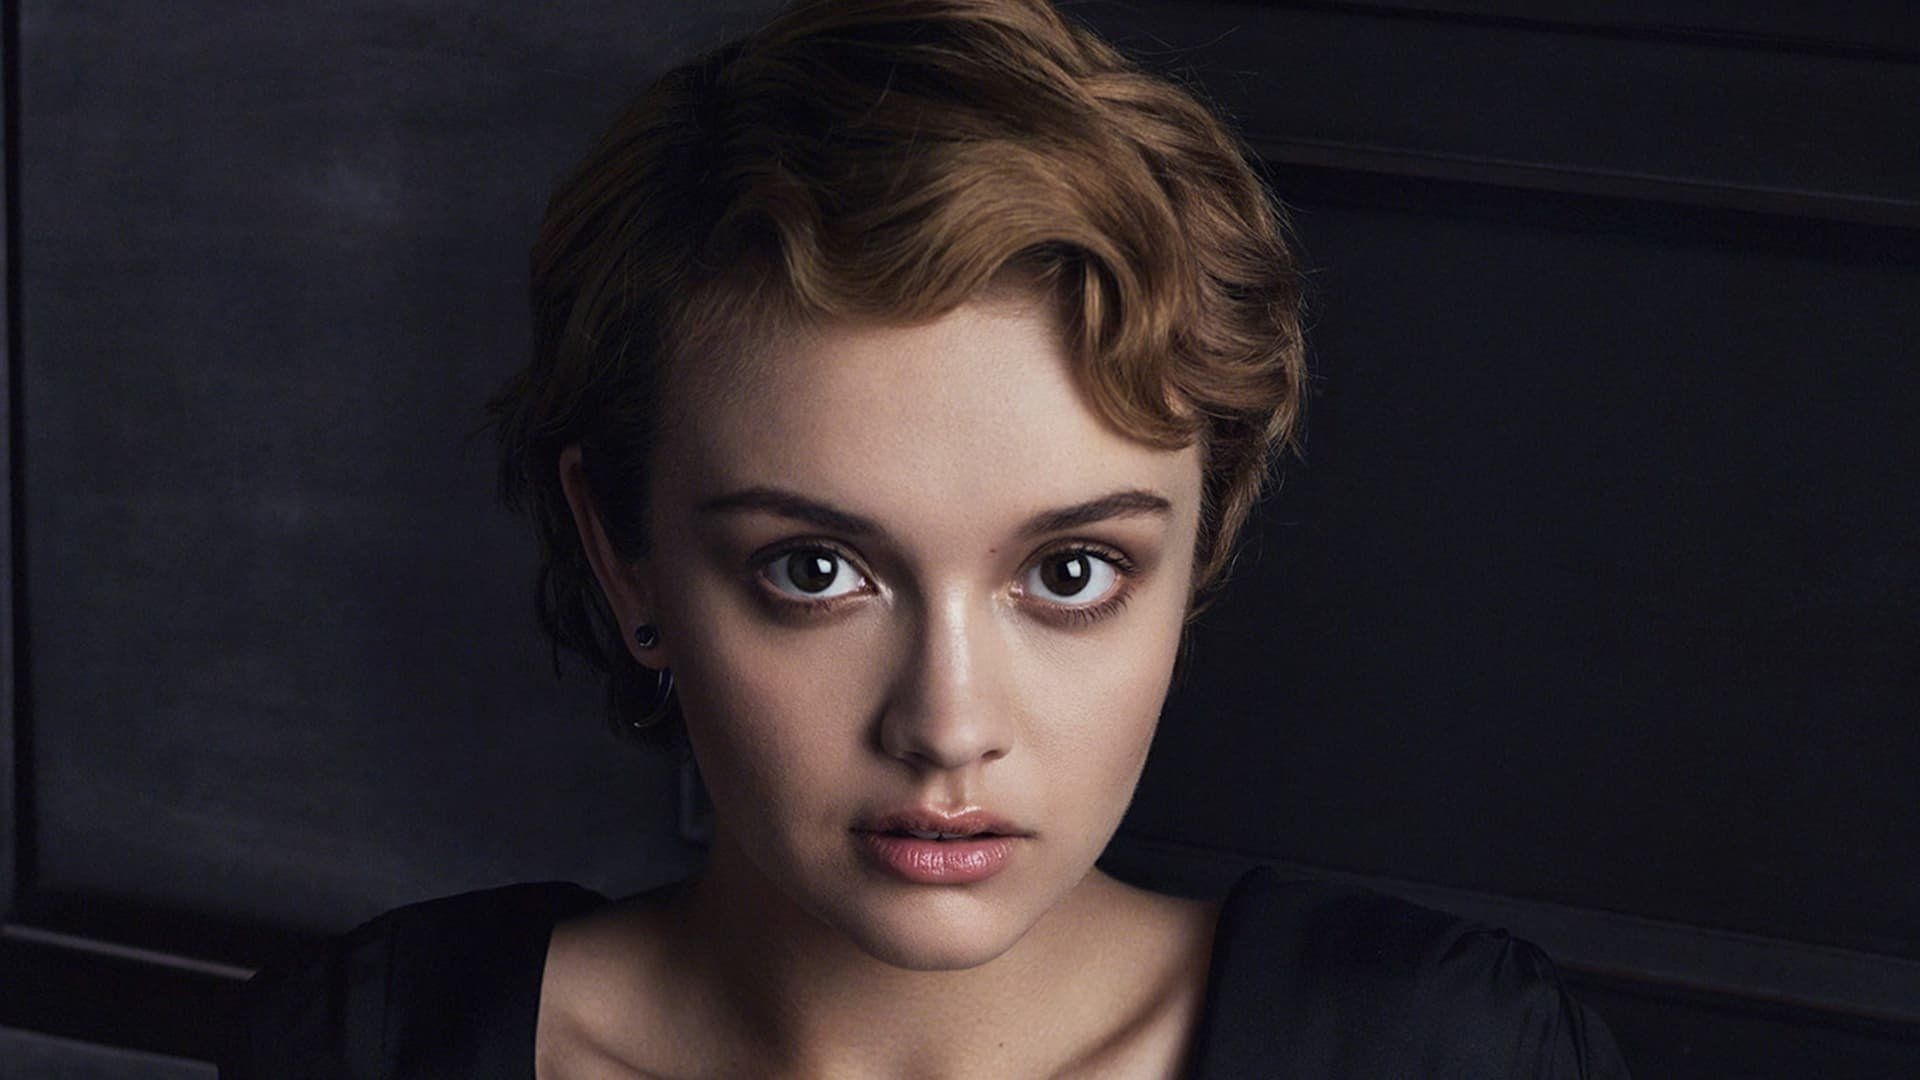 Olivia Cooke, Top wallpapers, Free backgrounds, High-resolution images, 1920x1080 Full HD Desktop